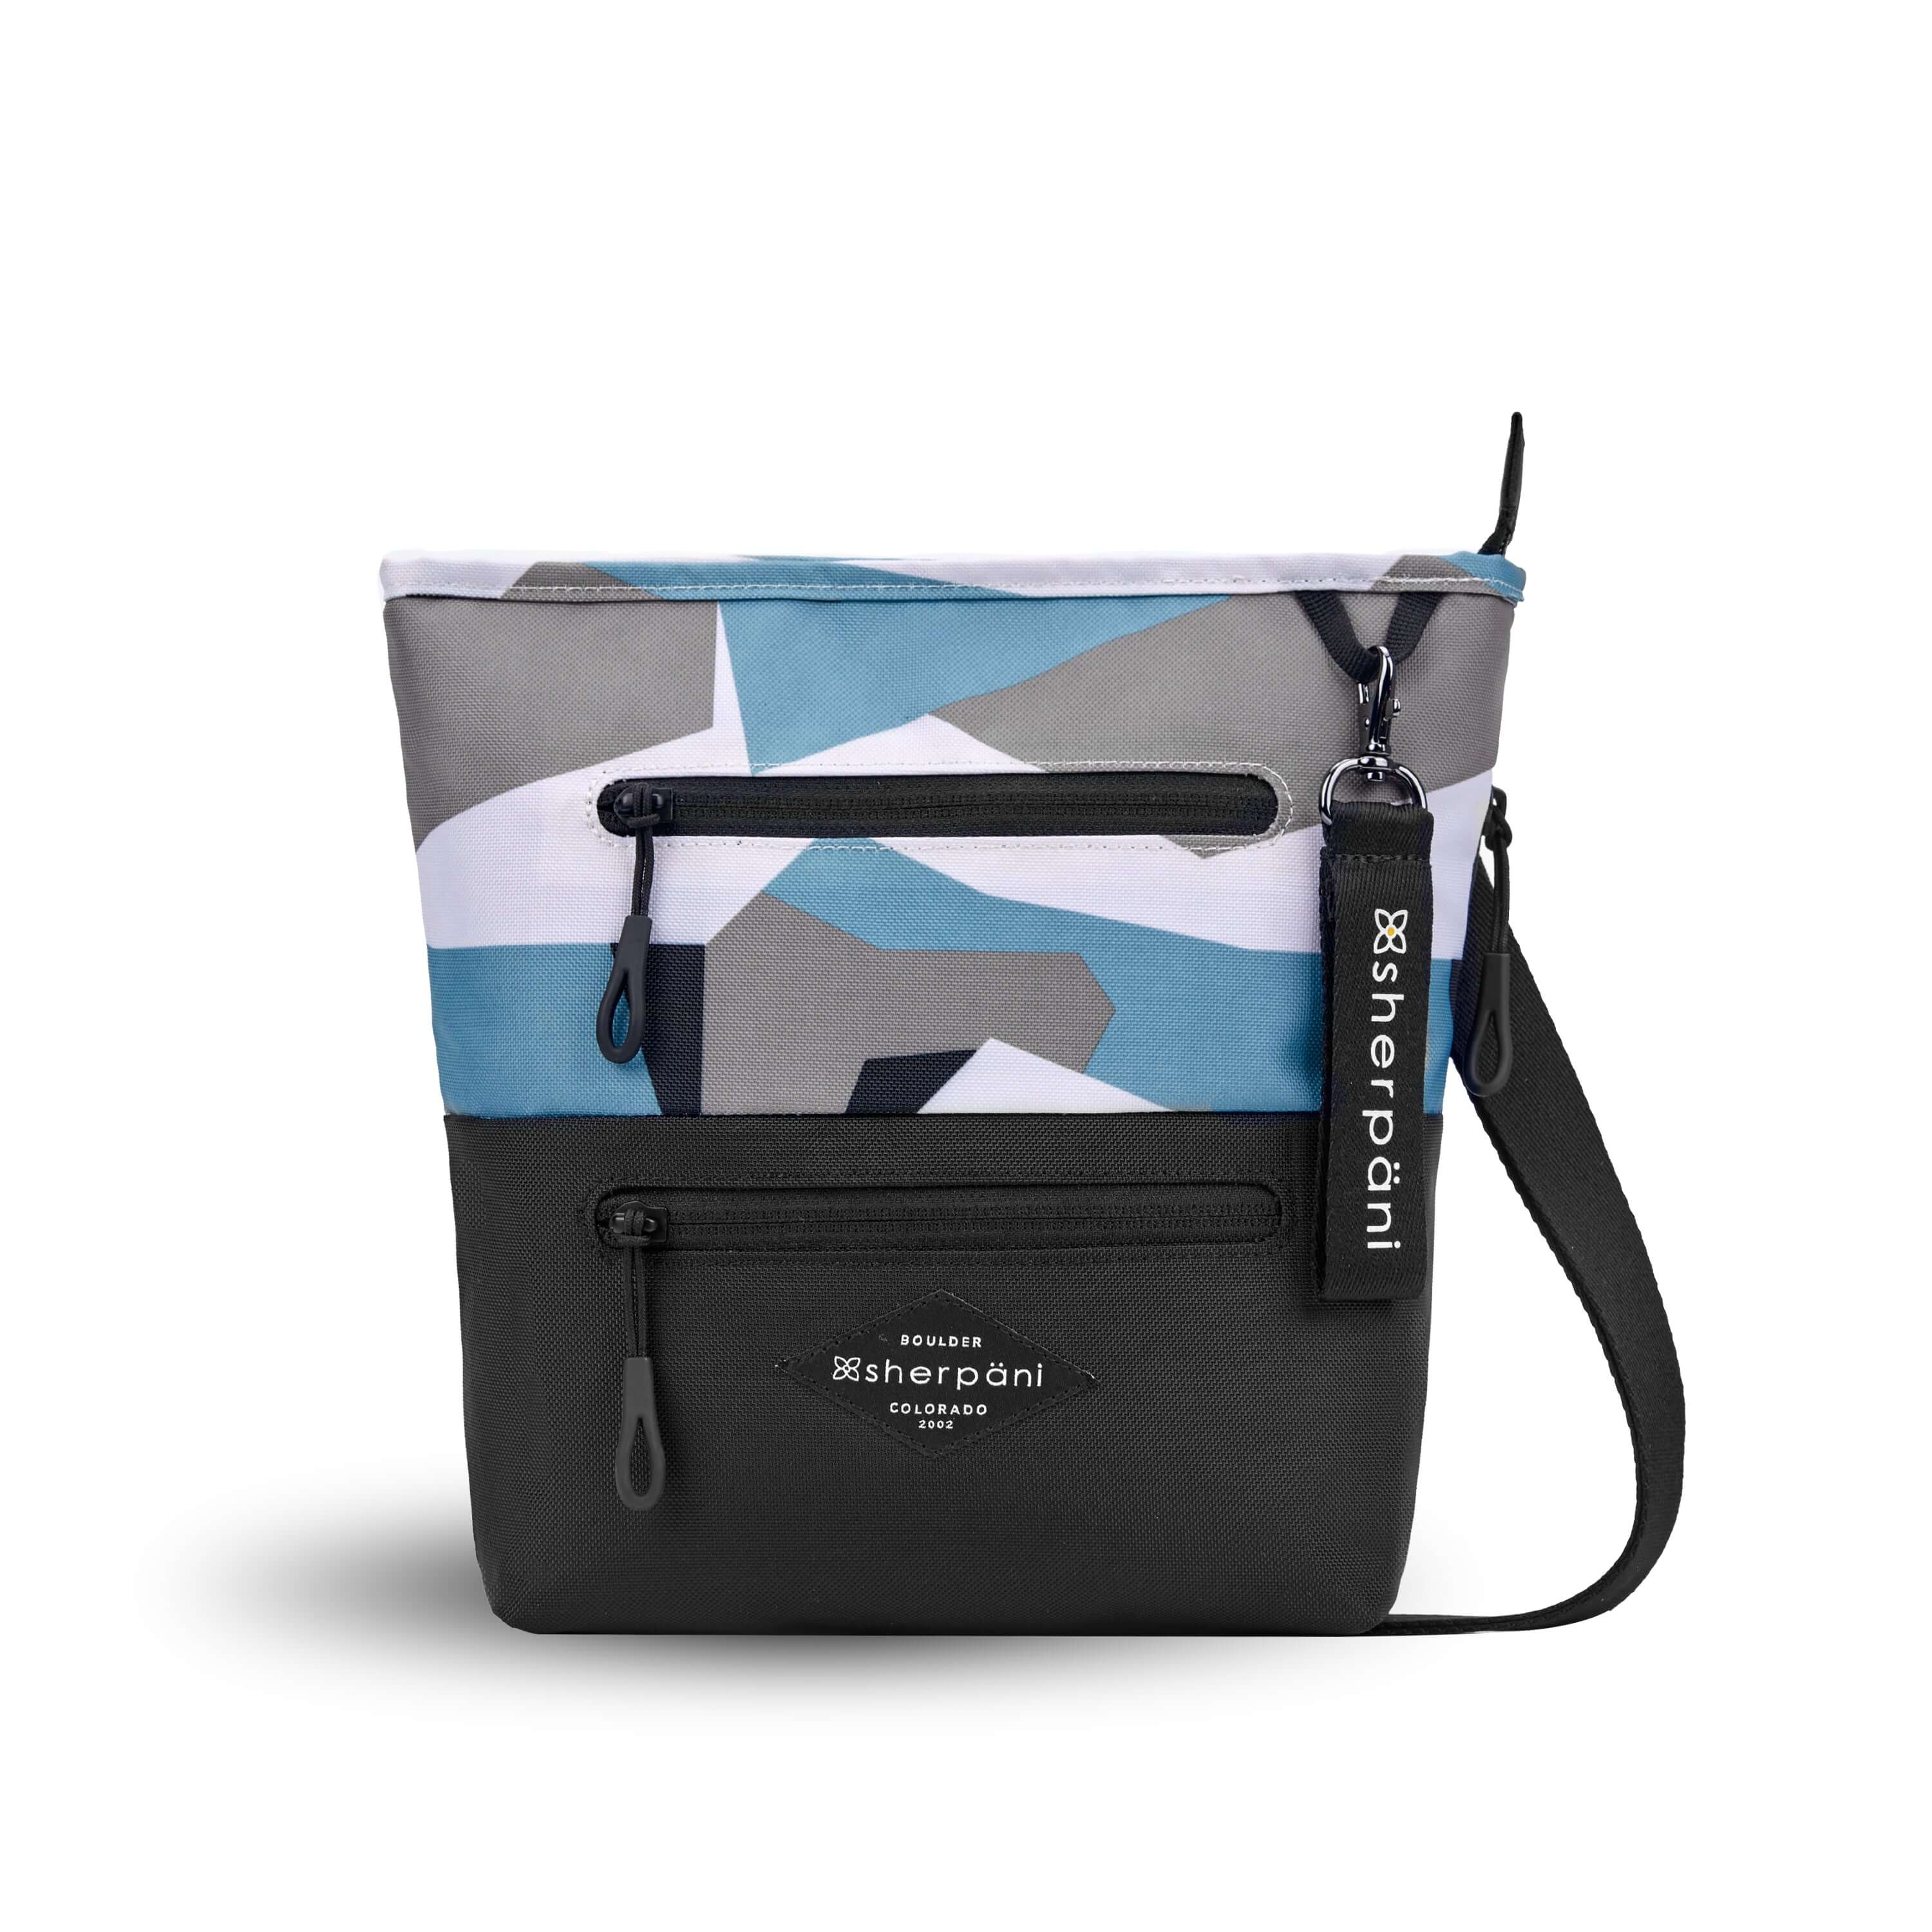 Flat front view of Sherpani’s crossbody, the Sadie, in Summer Camo. The top half of the bag is a camouflage pattern of white, gray and light blue, the bottom half of the bag is black. It features two exterior zipper pockets on the front panel with easy pull zippers accented in black. A Sherpani branded keychain is attached to a fabric loop in the upper right corner. It has an adjustable crossbody strap. 